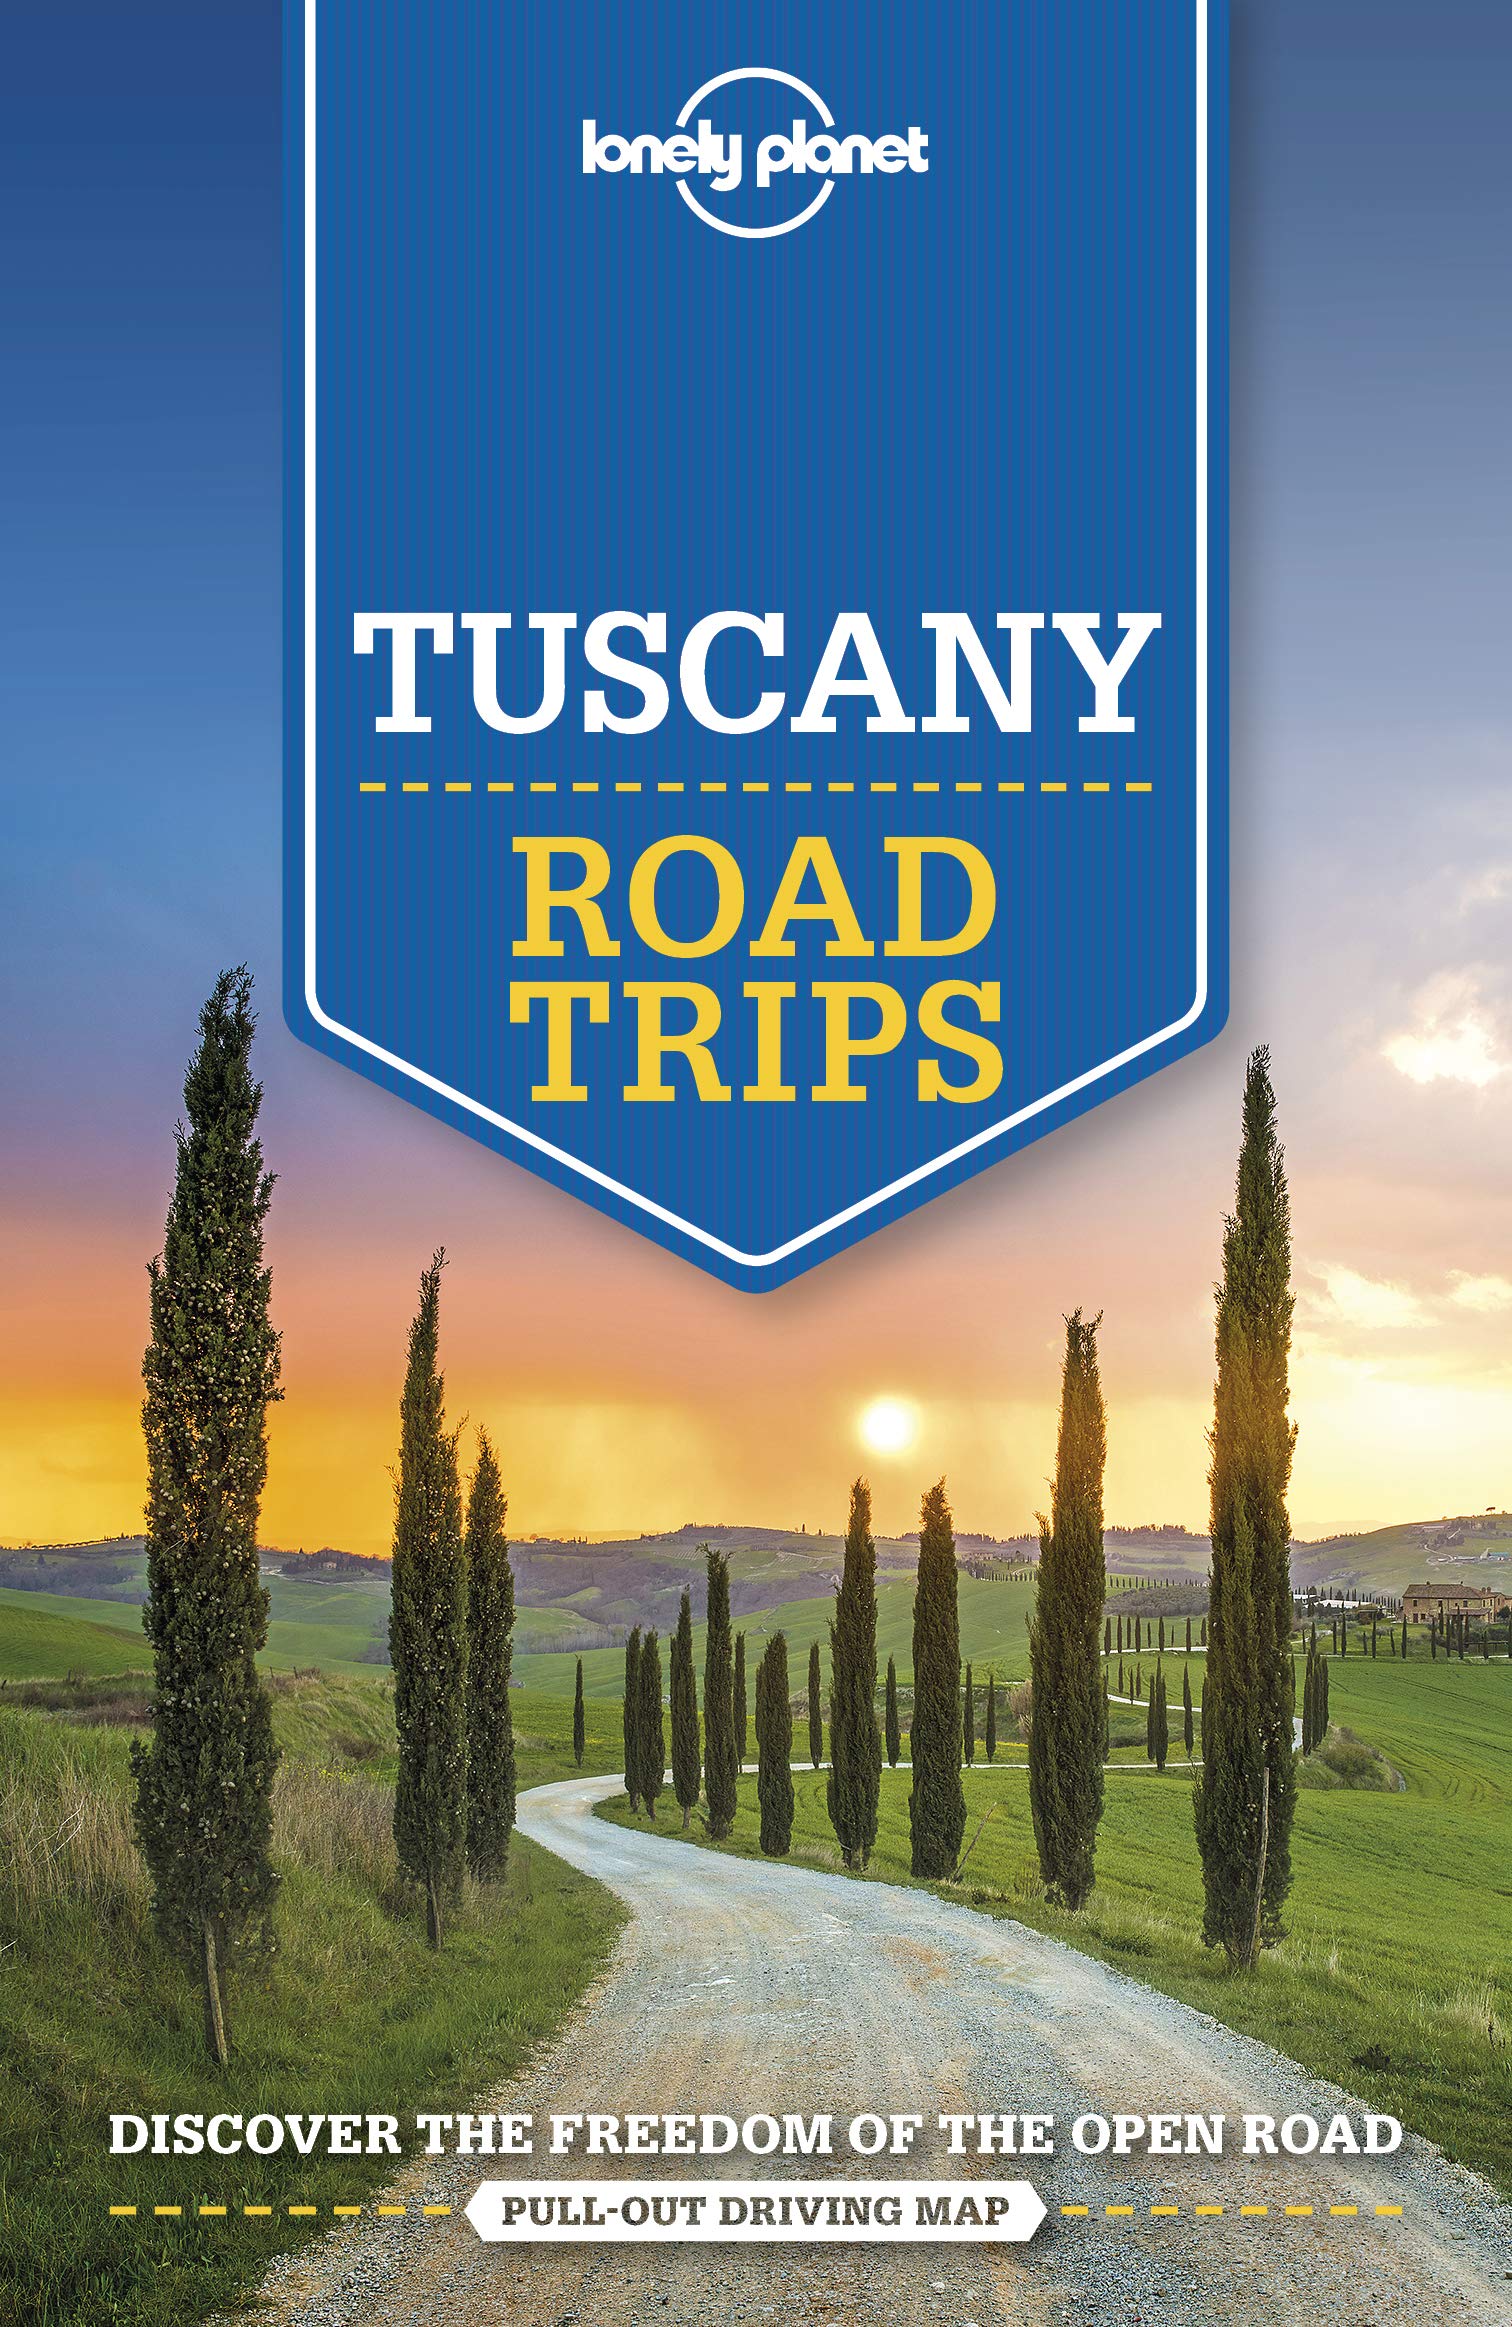 Tuscany Lonely Planet Road Trips 9781786575678  Lonely Planet Road Trips  Reisgidsen Toscane, Florence